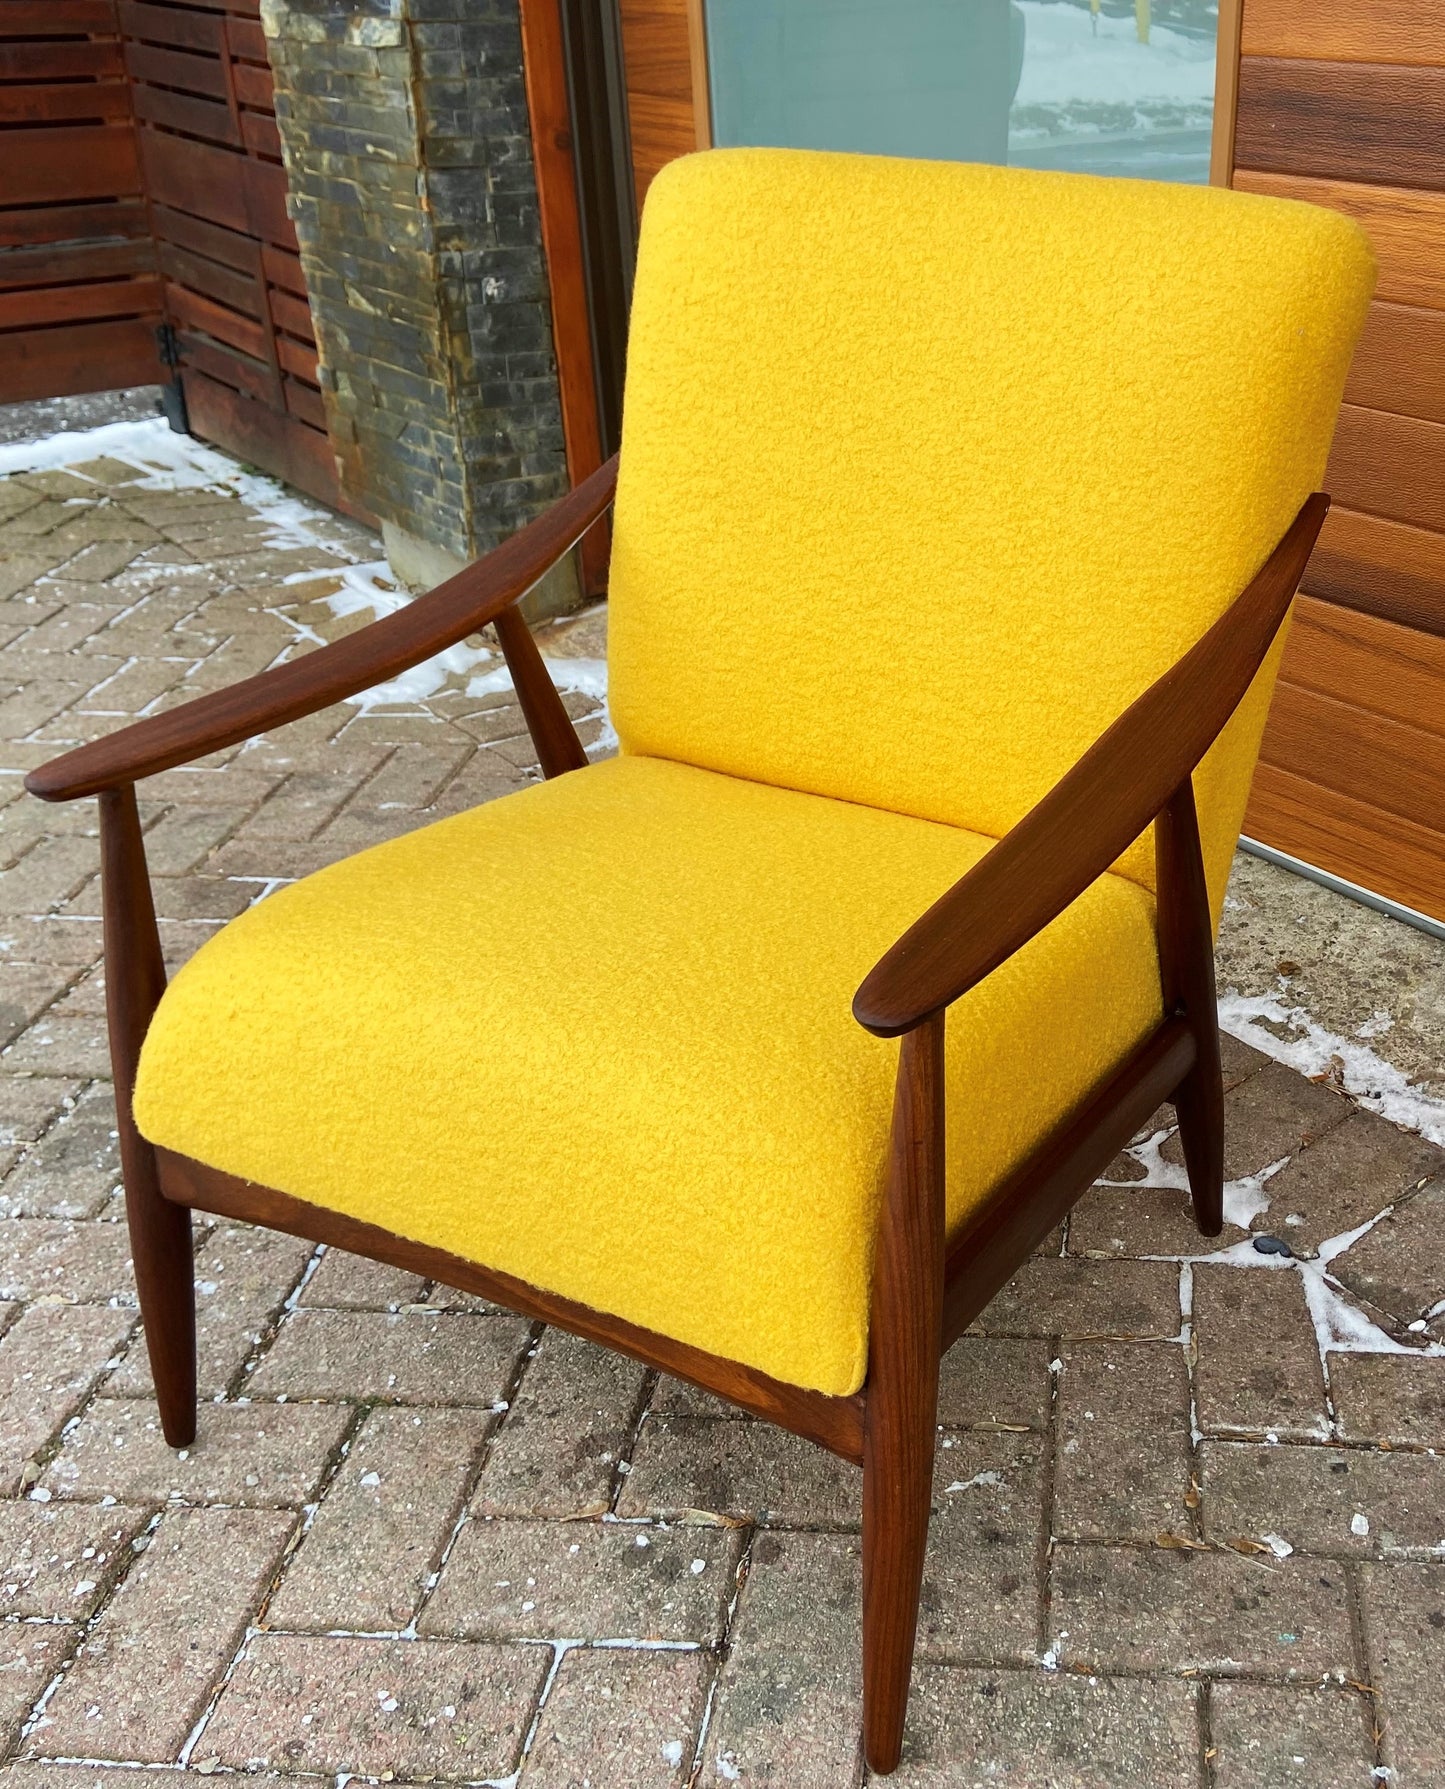 REFINISHED REUPHOLSTERED Mid-Century Modern Teak Armchair